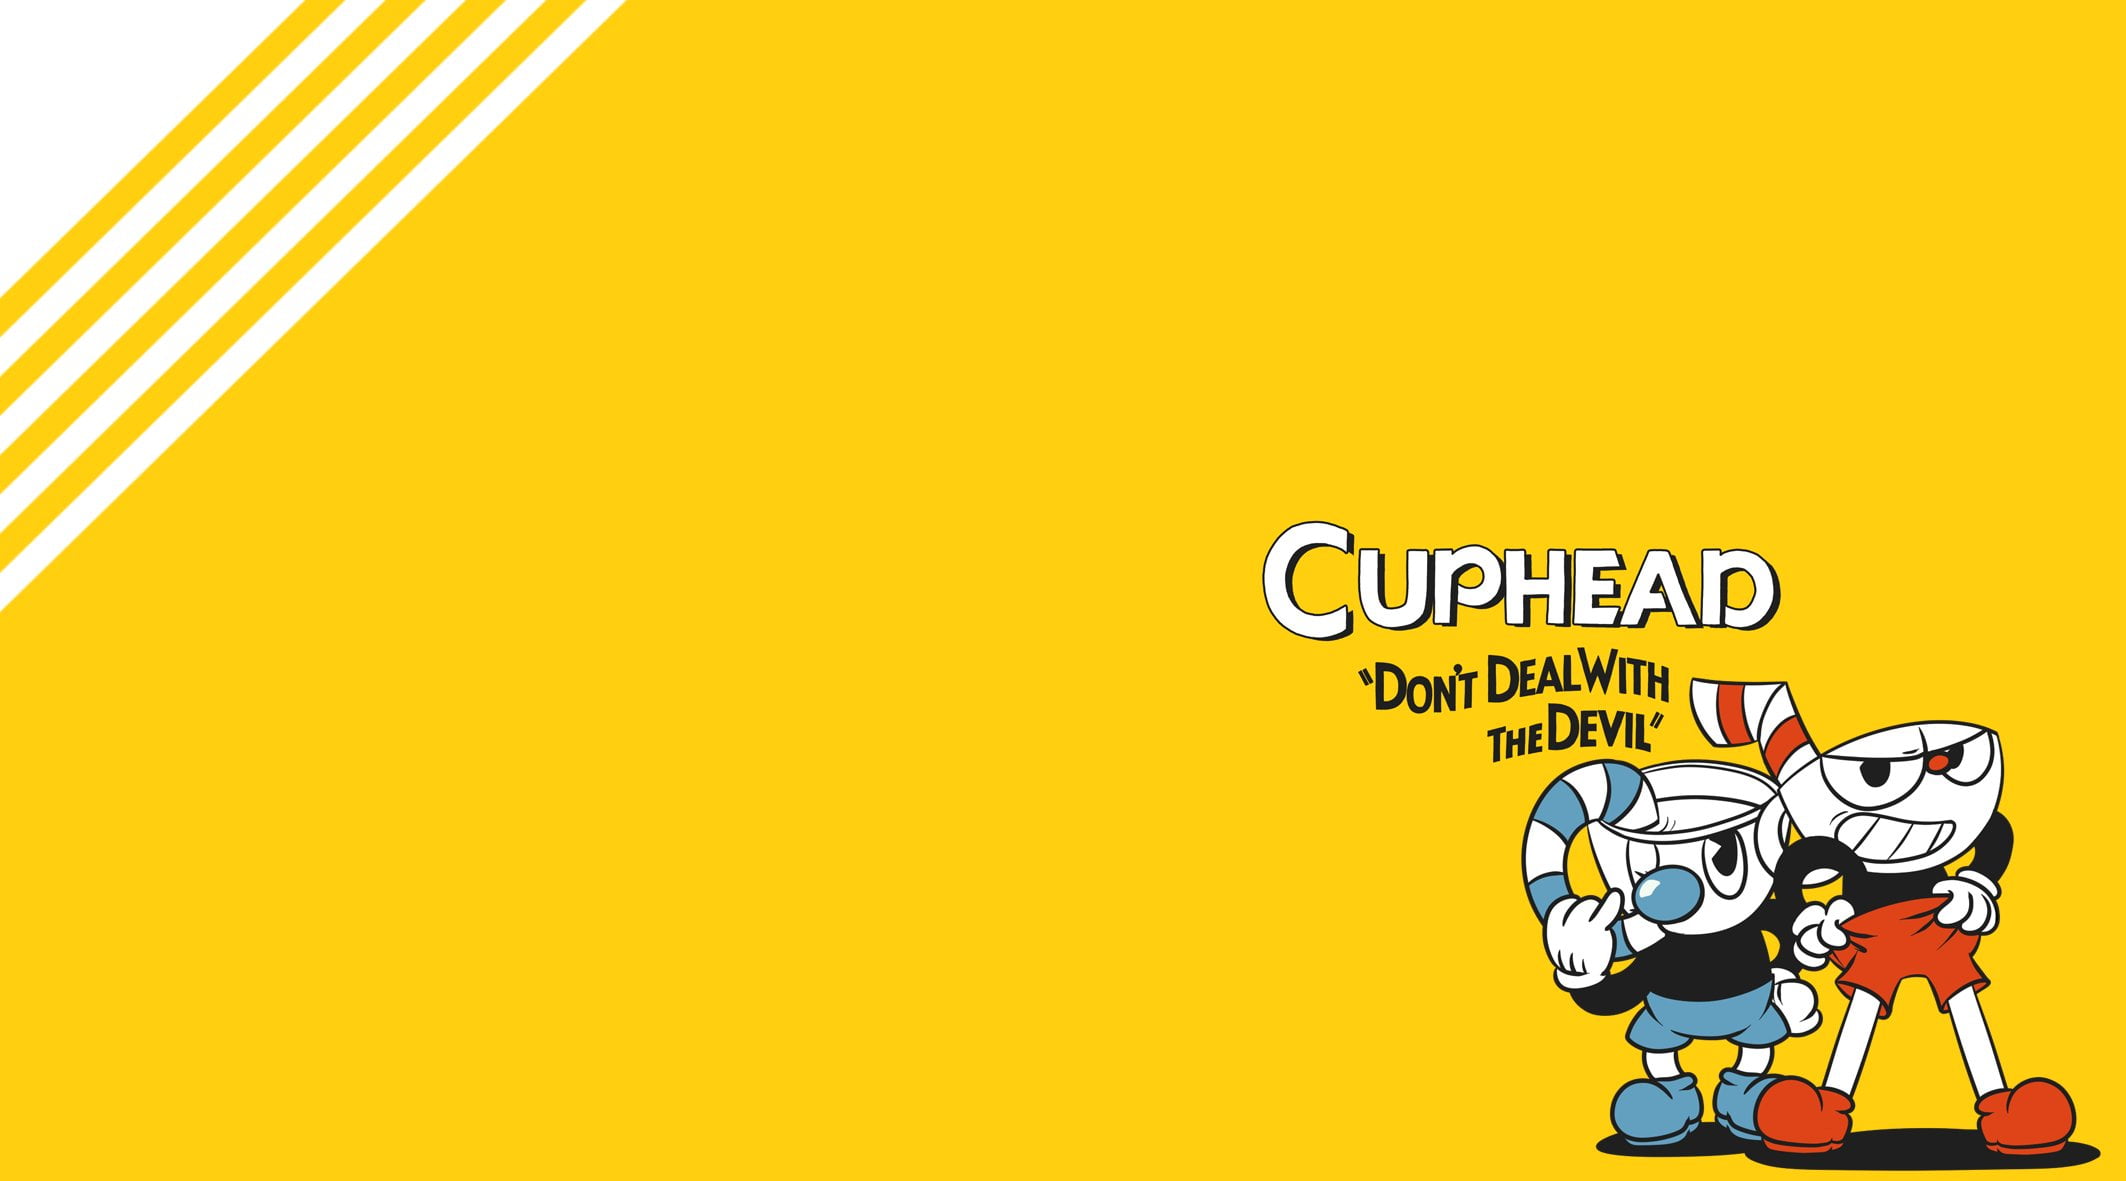 Cuphead, Cuphead (Video Game), video game characters, yellow background